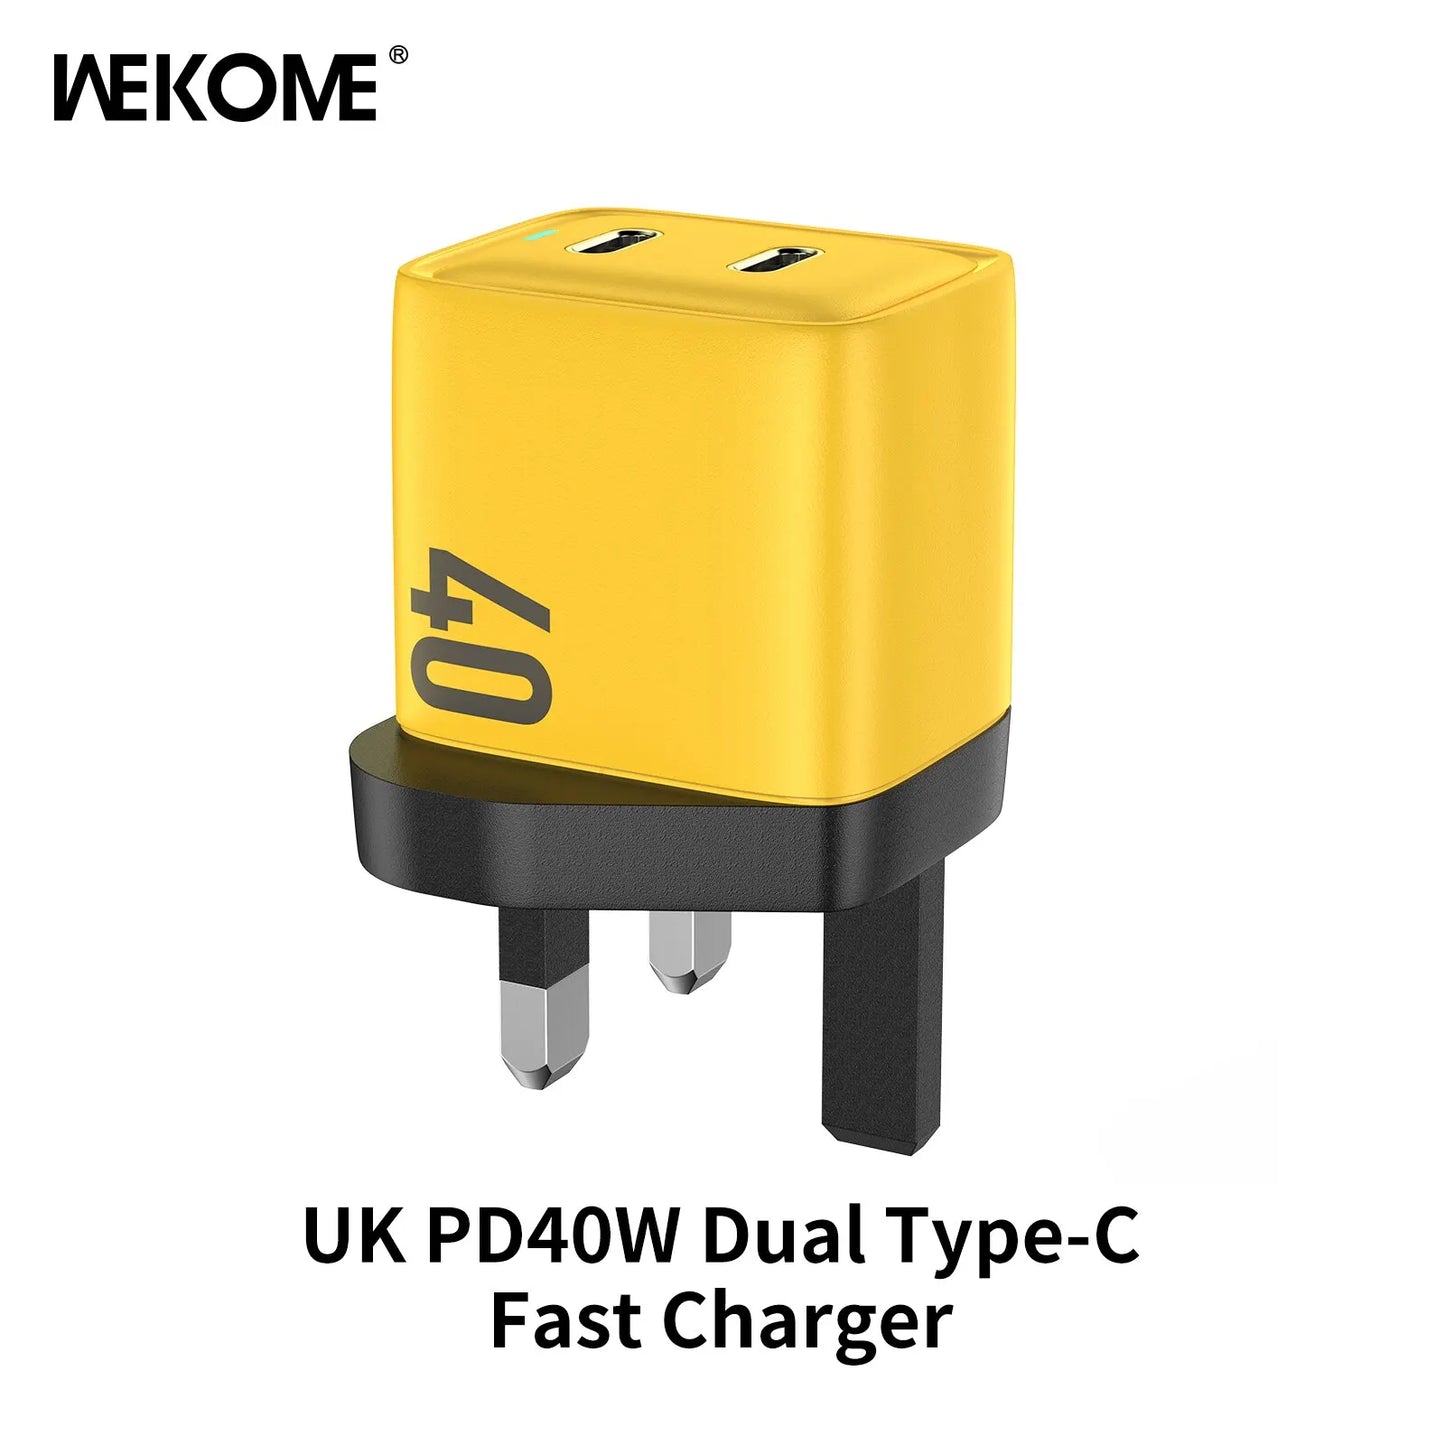 WEKOME GaN 40W/67W/100W Type C Charger Portable USB Charger Adapter QC4.0 PD PPS Fast Charging for iPhone Samsung Xiaomi Macbook UK Yellow